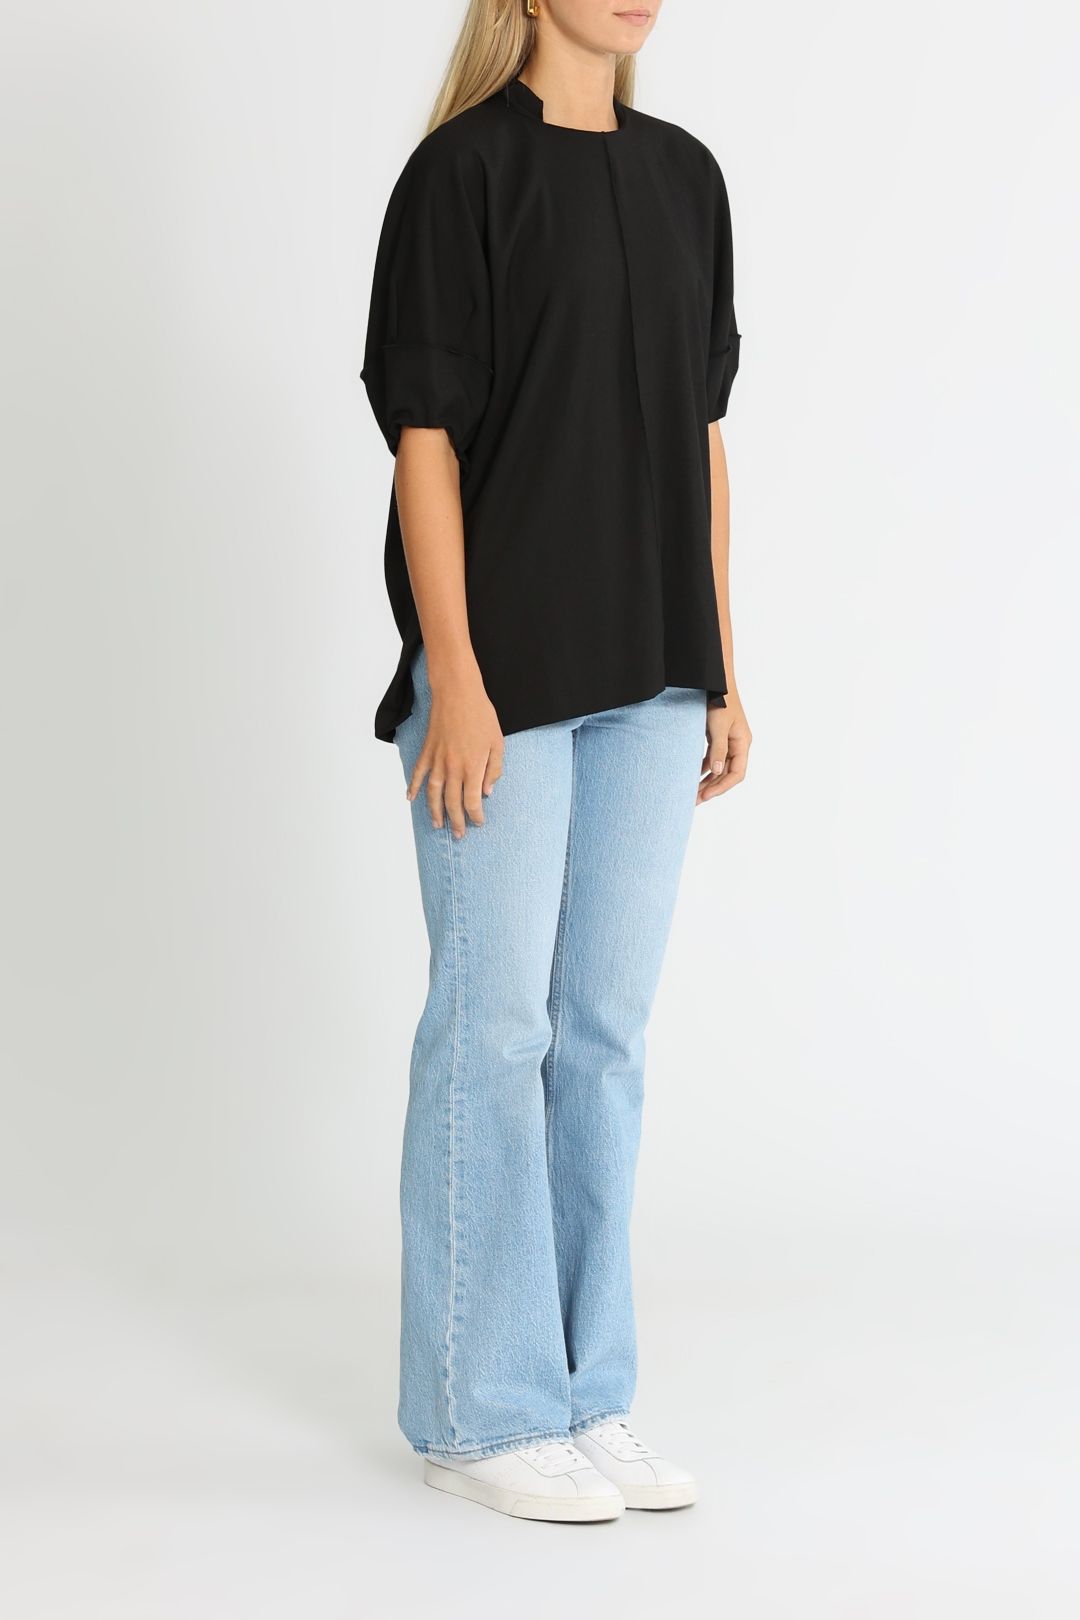 Camilla and Marc Ford Puff Sleeve Top Black